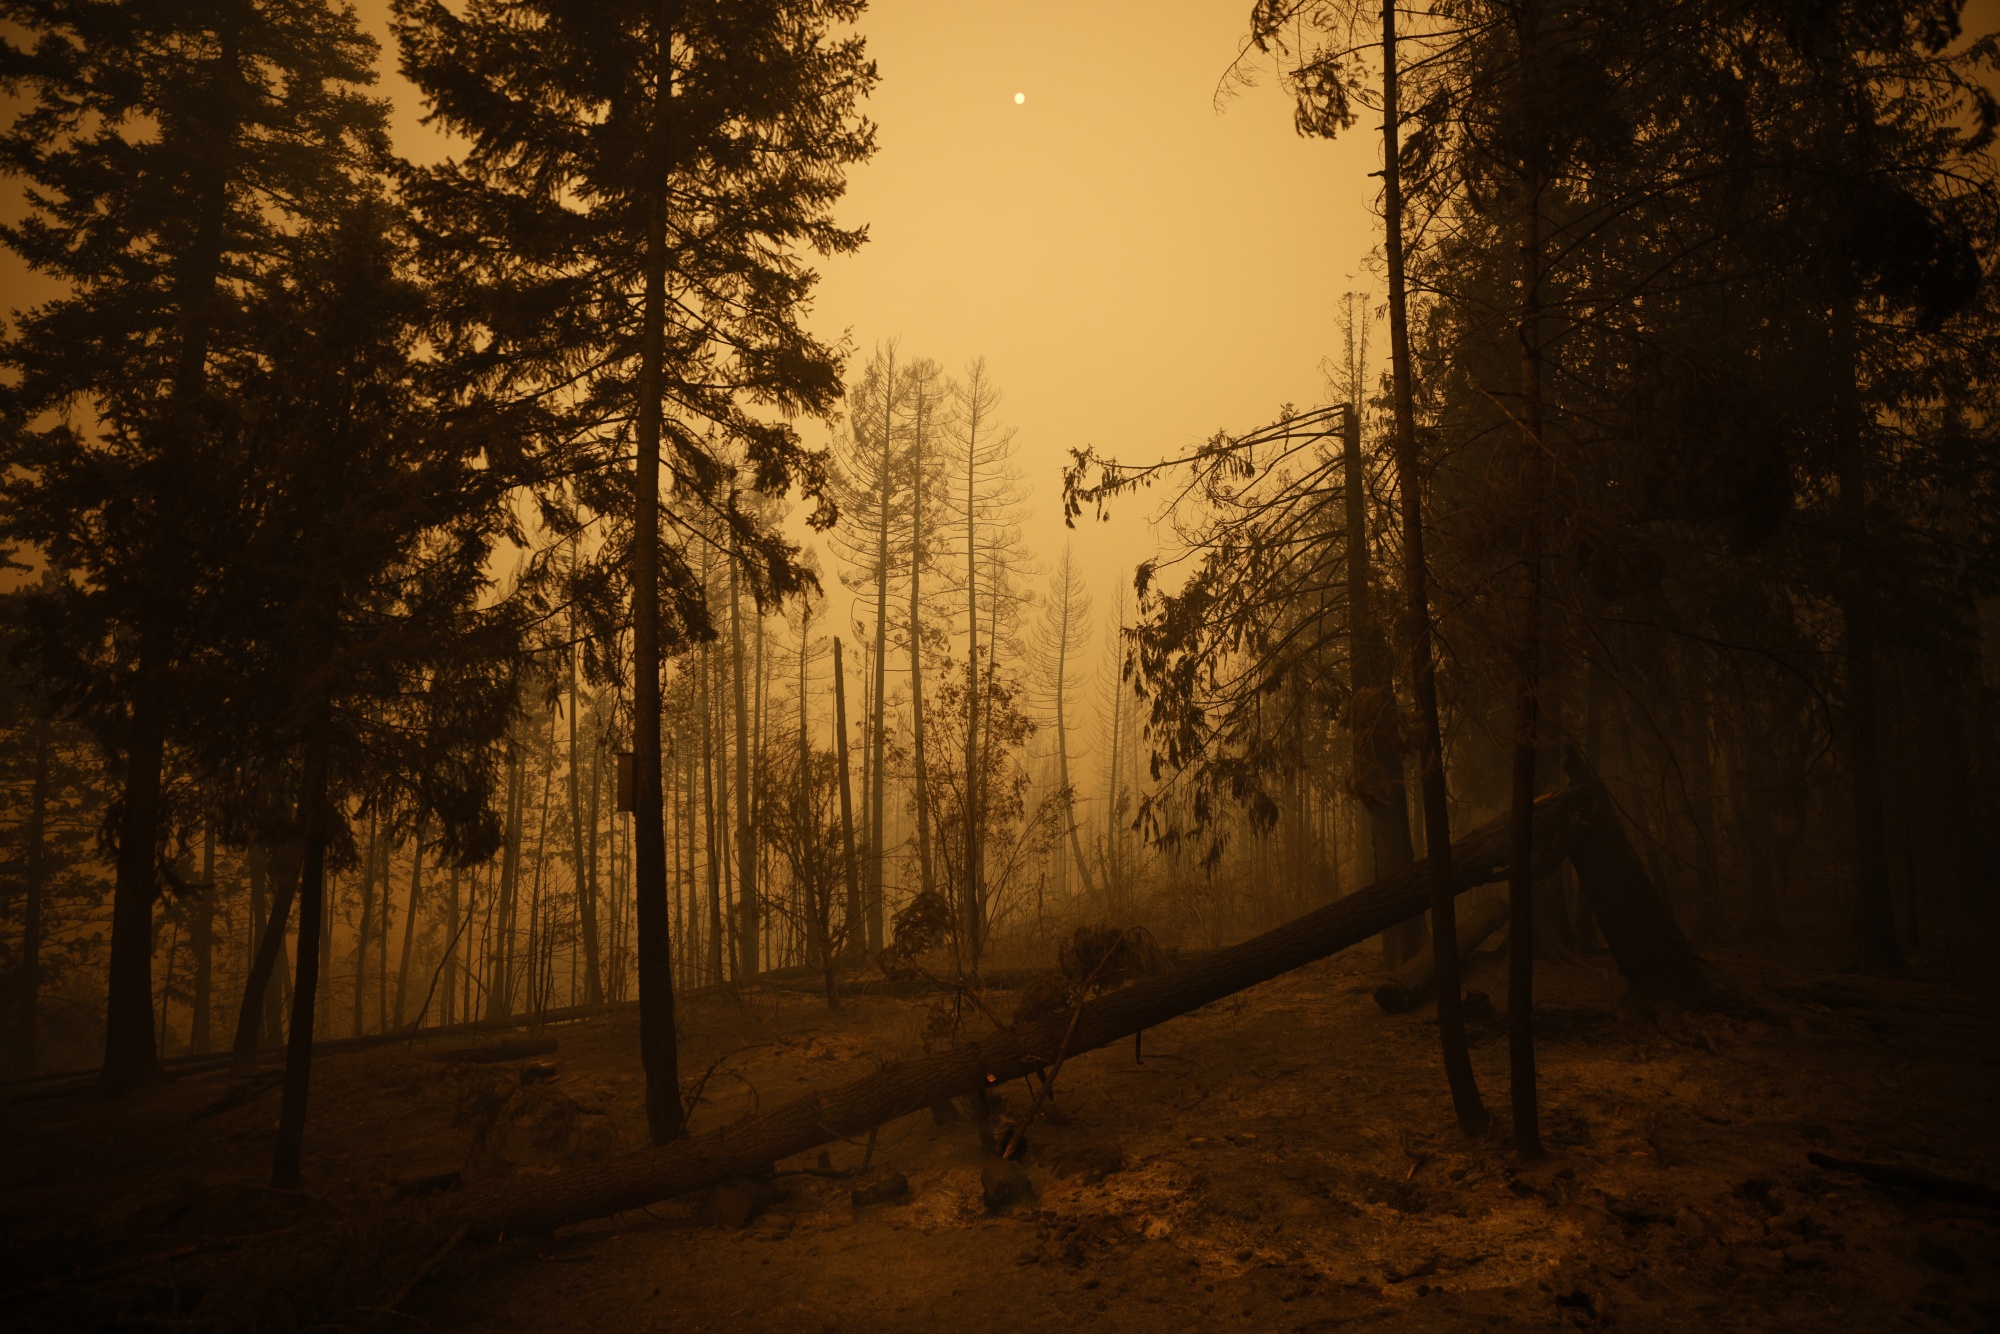 Canada suffered its worst wildfire season ever last year. Here a&nbsp;forest smolders after a wildfire in Celista, British Columbia, Canada&nbsp;on Aug. 19, 2023.